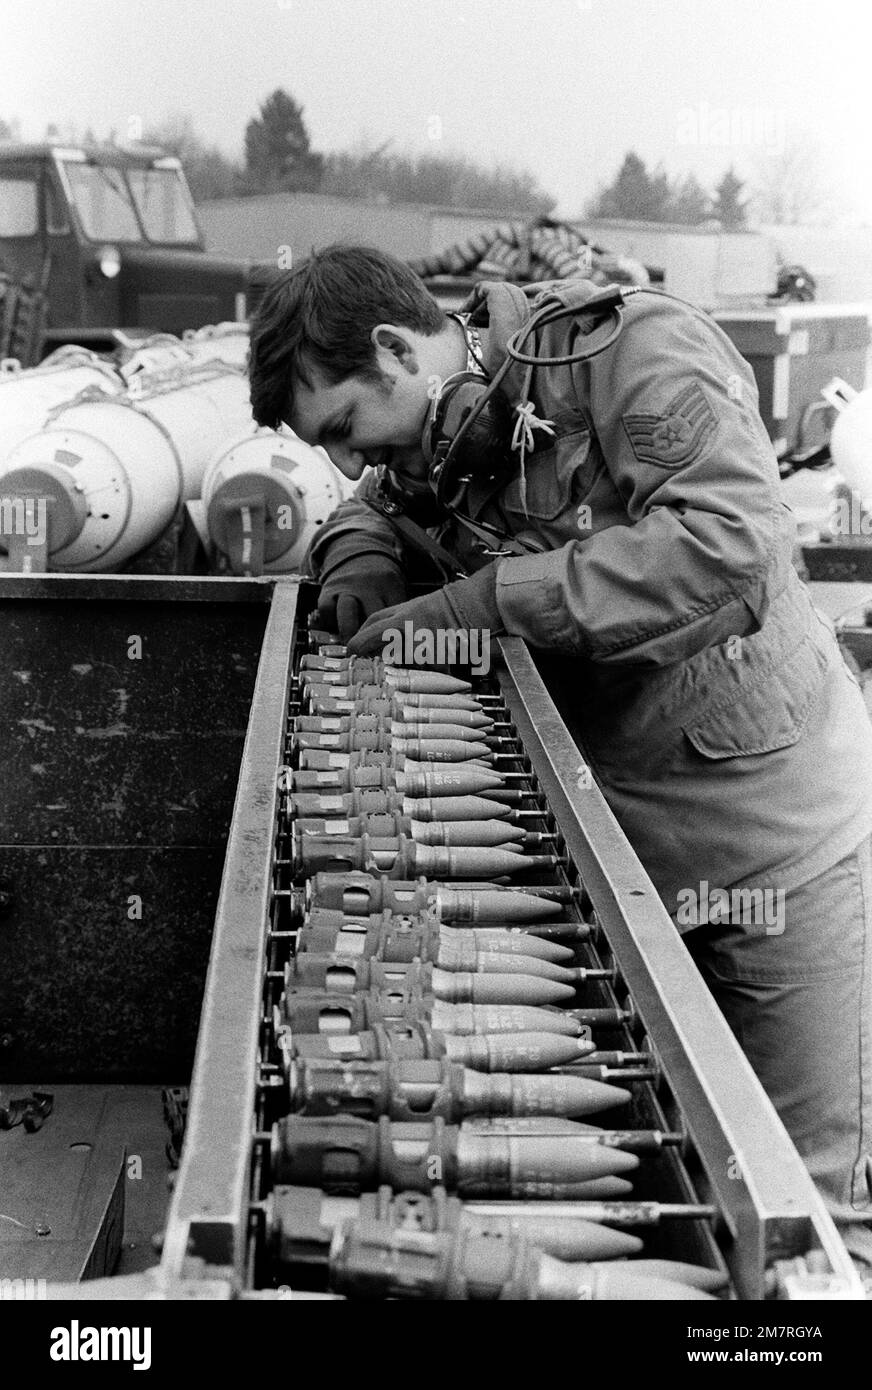 SSGT Ron Lowery checks a quick loader of 20mm rounds to ensure proper clipping. SSGT Lowery is a loading crew supervisor preparing to load the rounds into an F-4 Phantom II aircraft nose gun. Base: Spangdahlem Air Base State: Rheinland-Pfalz Country: Deutschland / Germany (DEU) Stock Photo